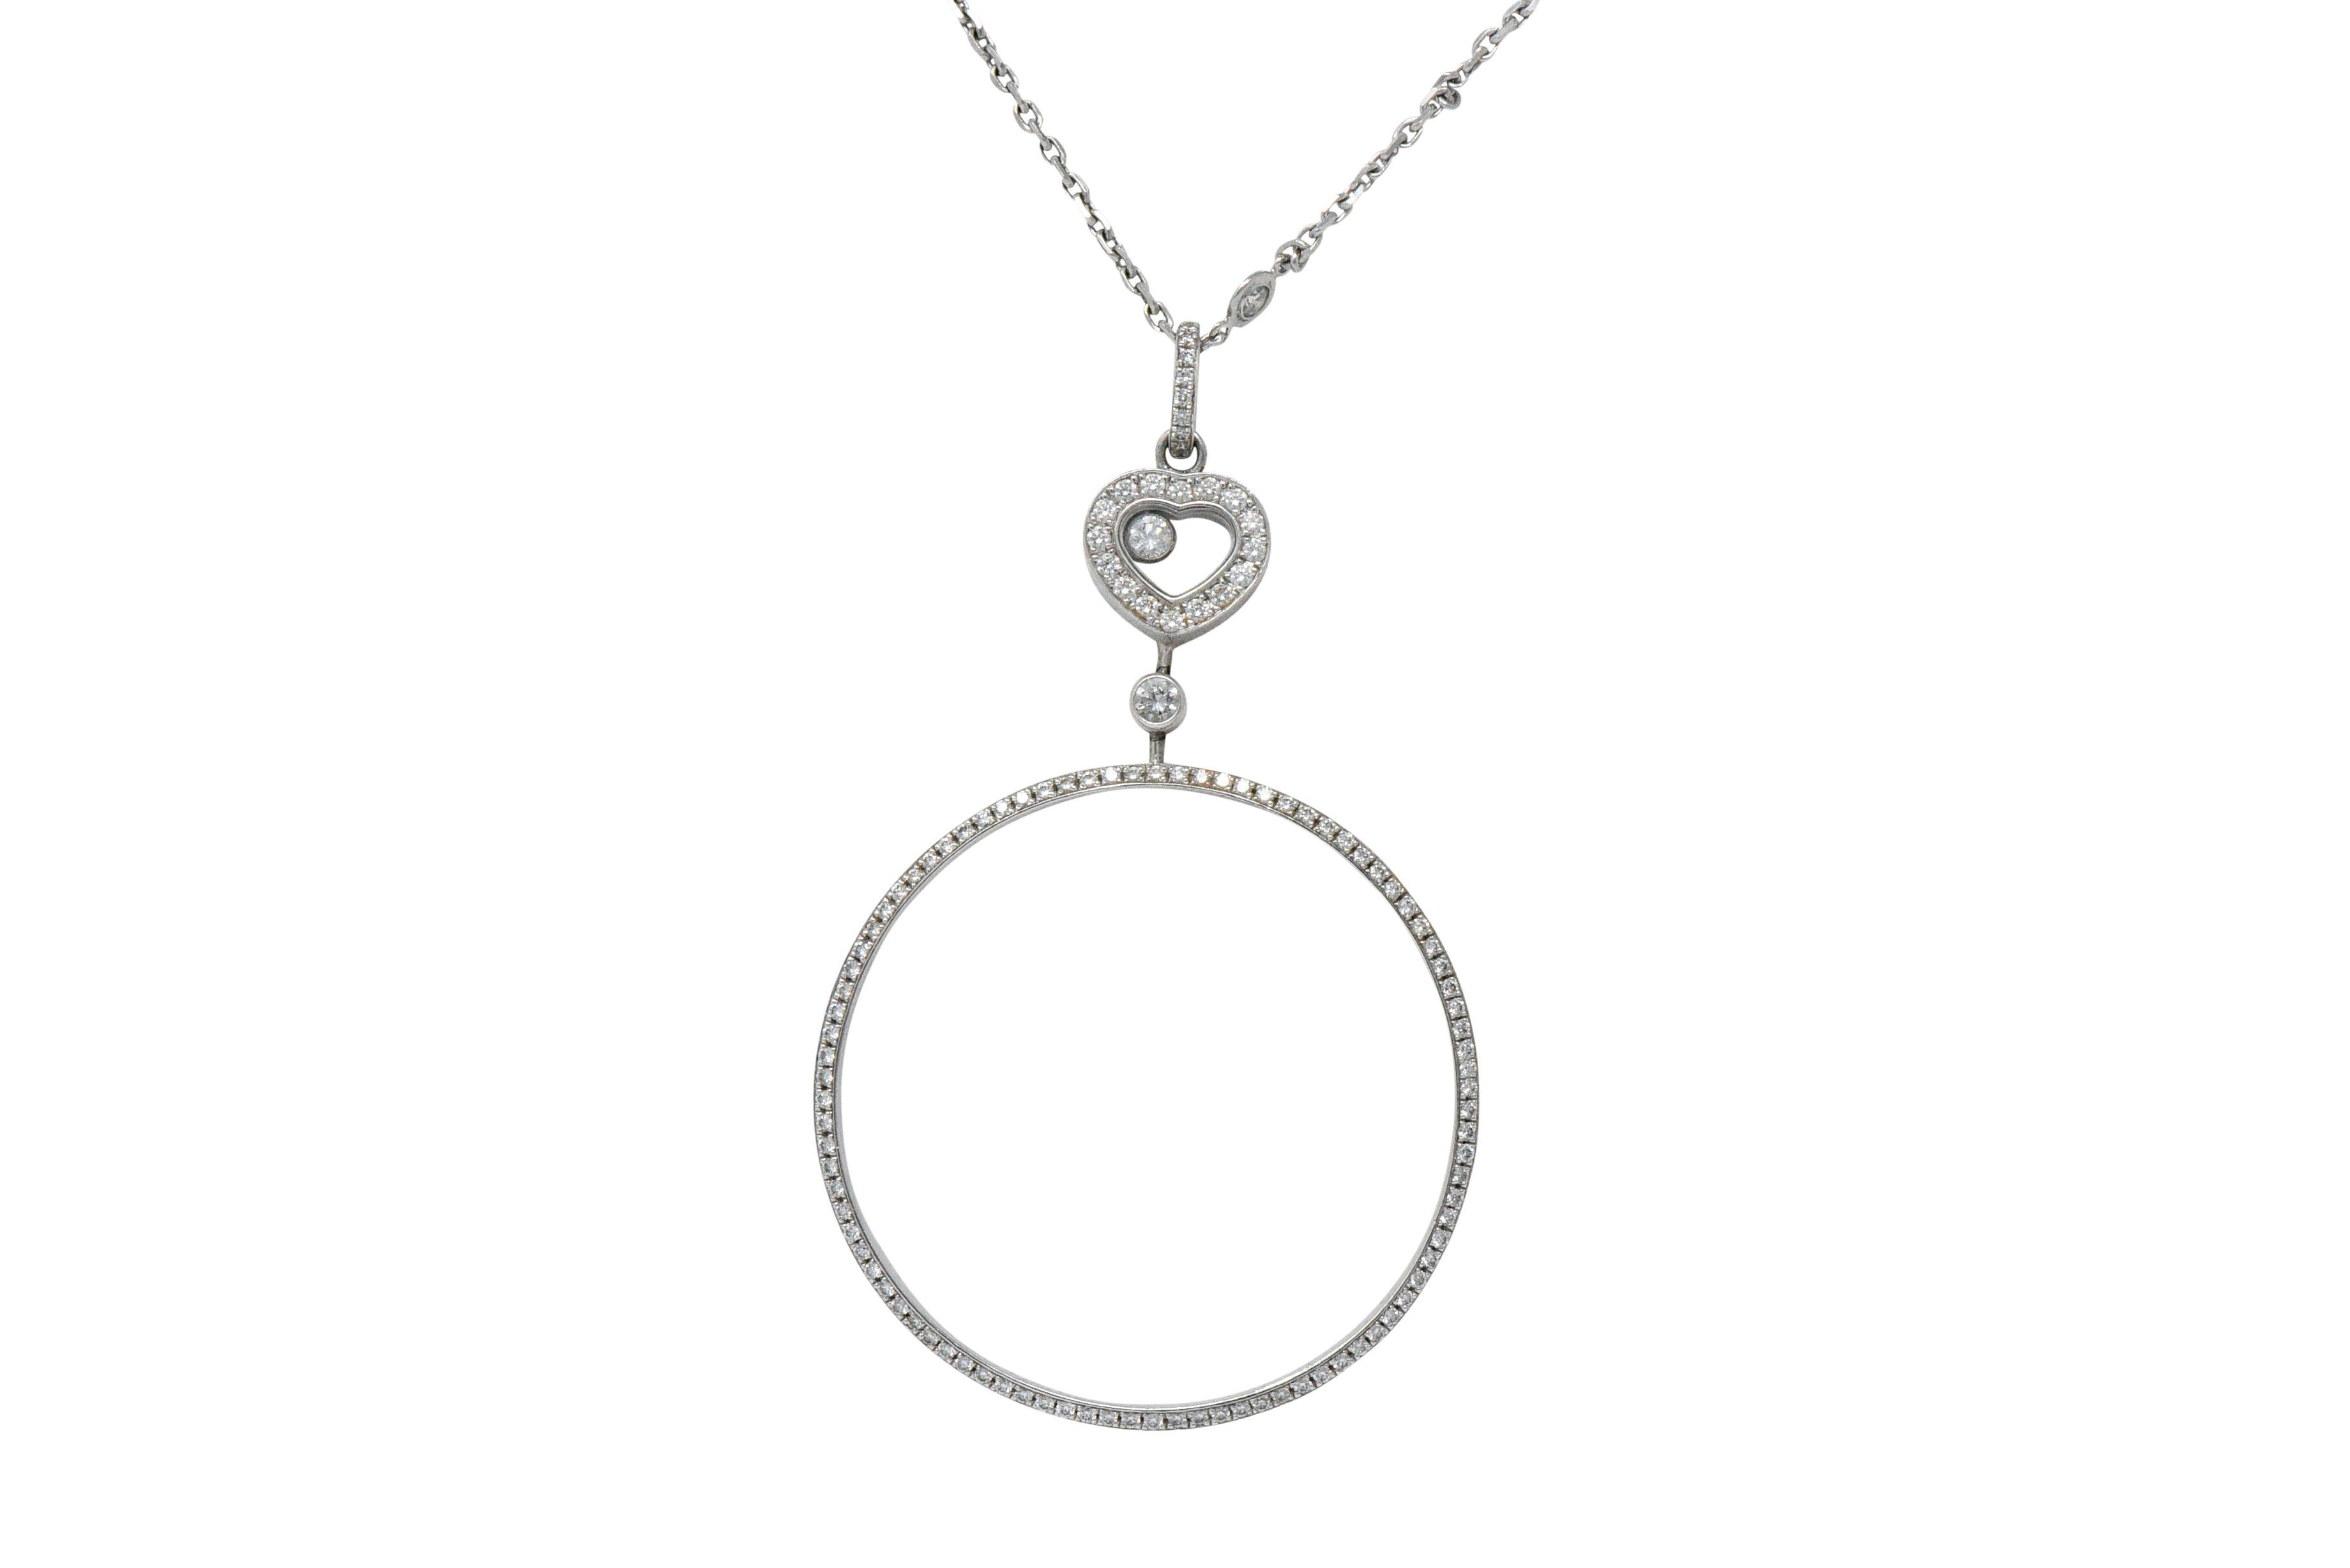 Pendant designed as a heart suspending a large open circle drop; heart accented by 